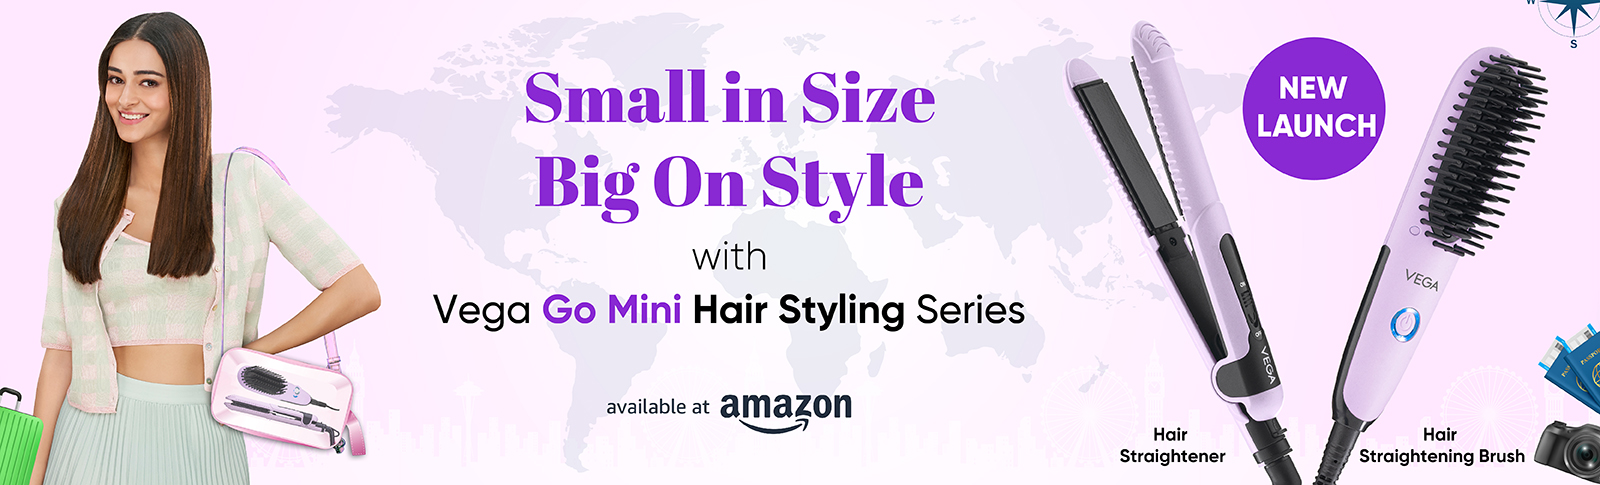 Small in Size Big on Style